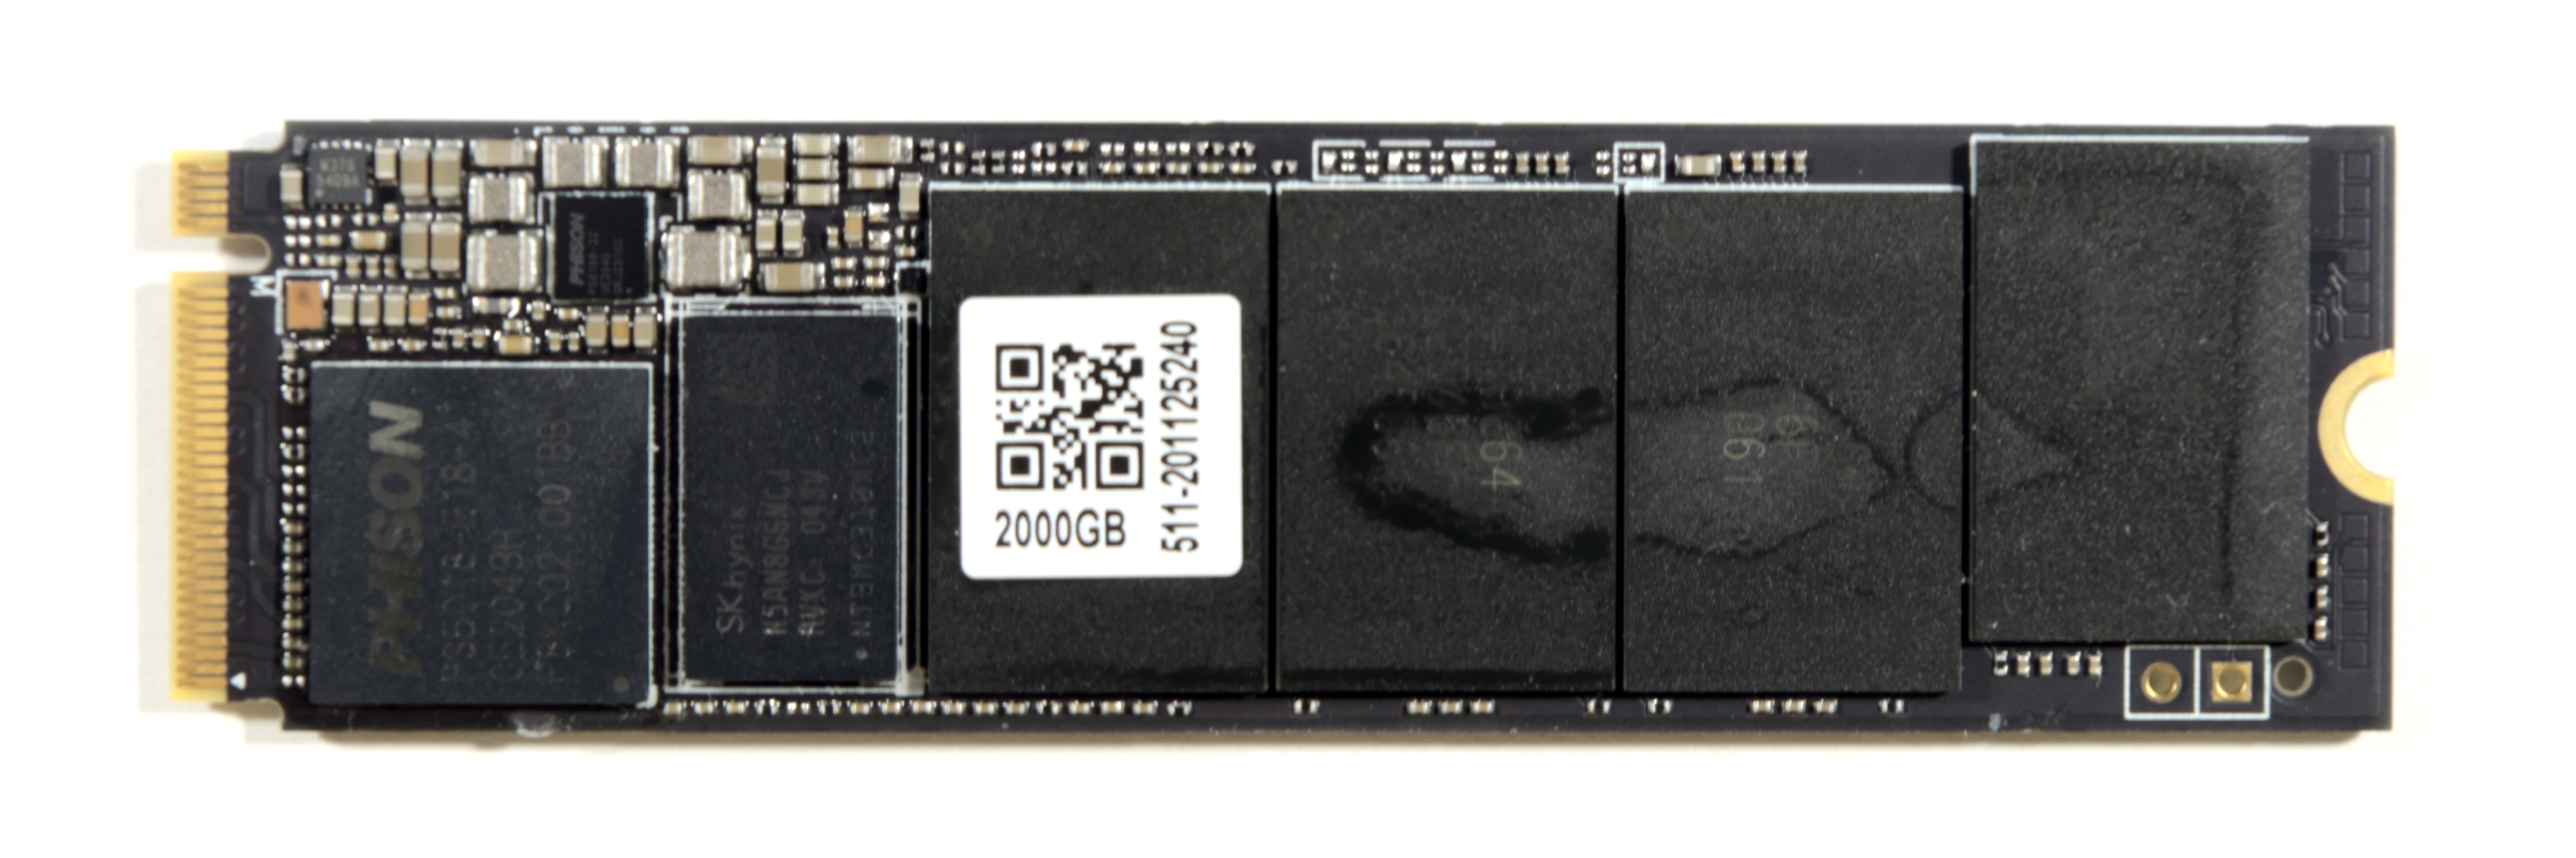 Inland Prime M.2 NVMe SSD Review: Entry-Level on the Cheap